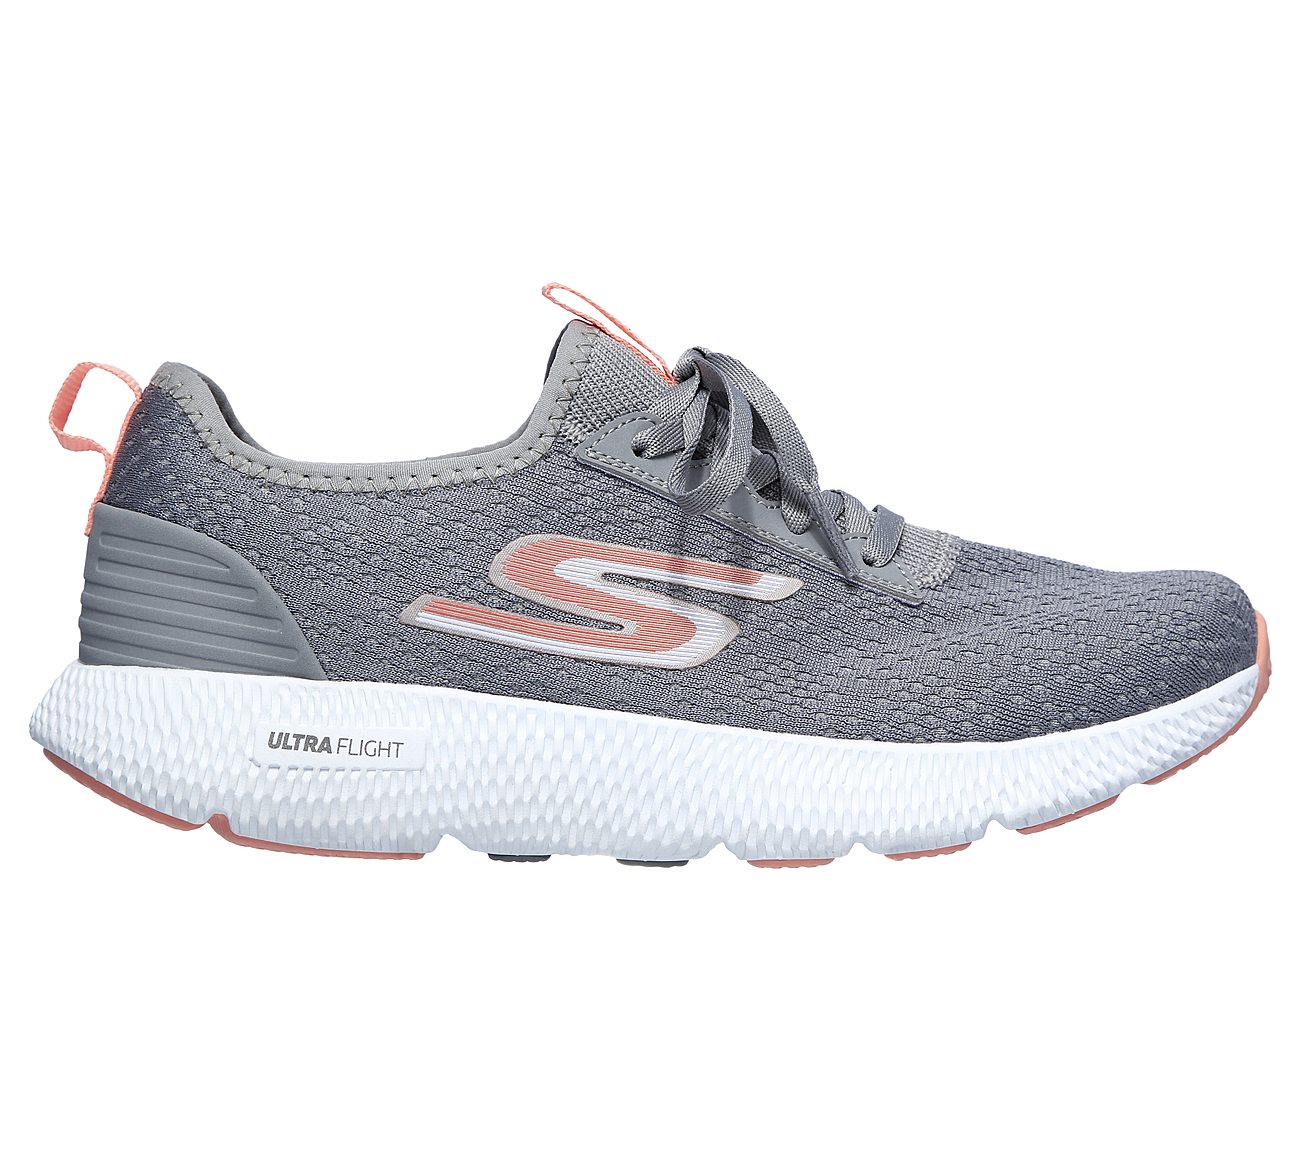 HORIZON - COOL IT, GREY/CORAL Footwear Lateral View